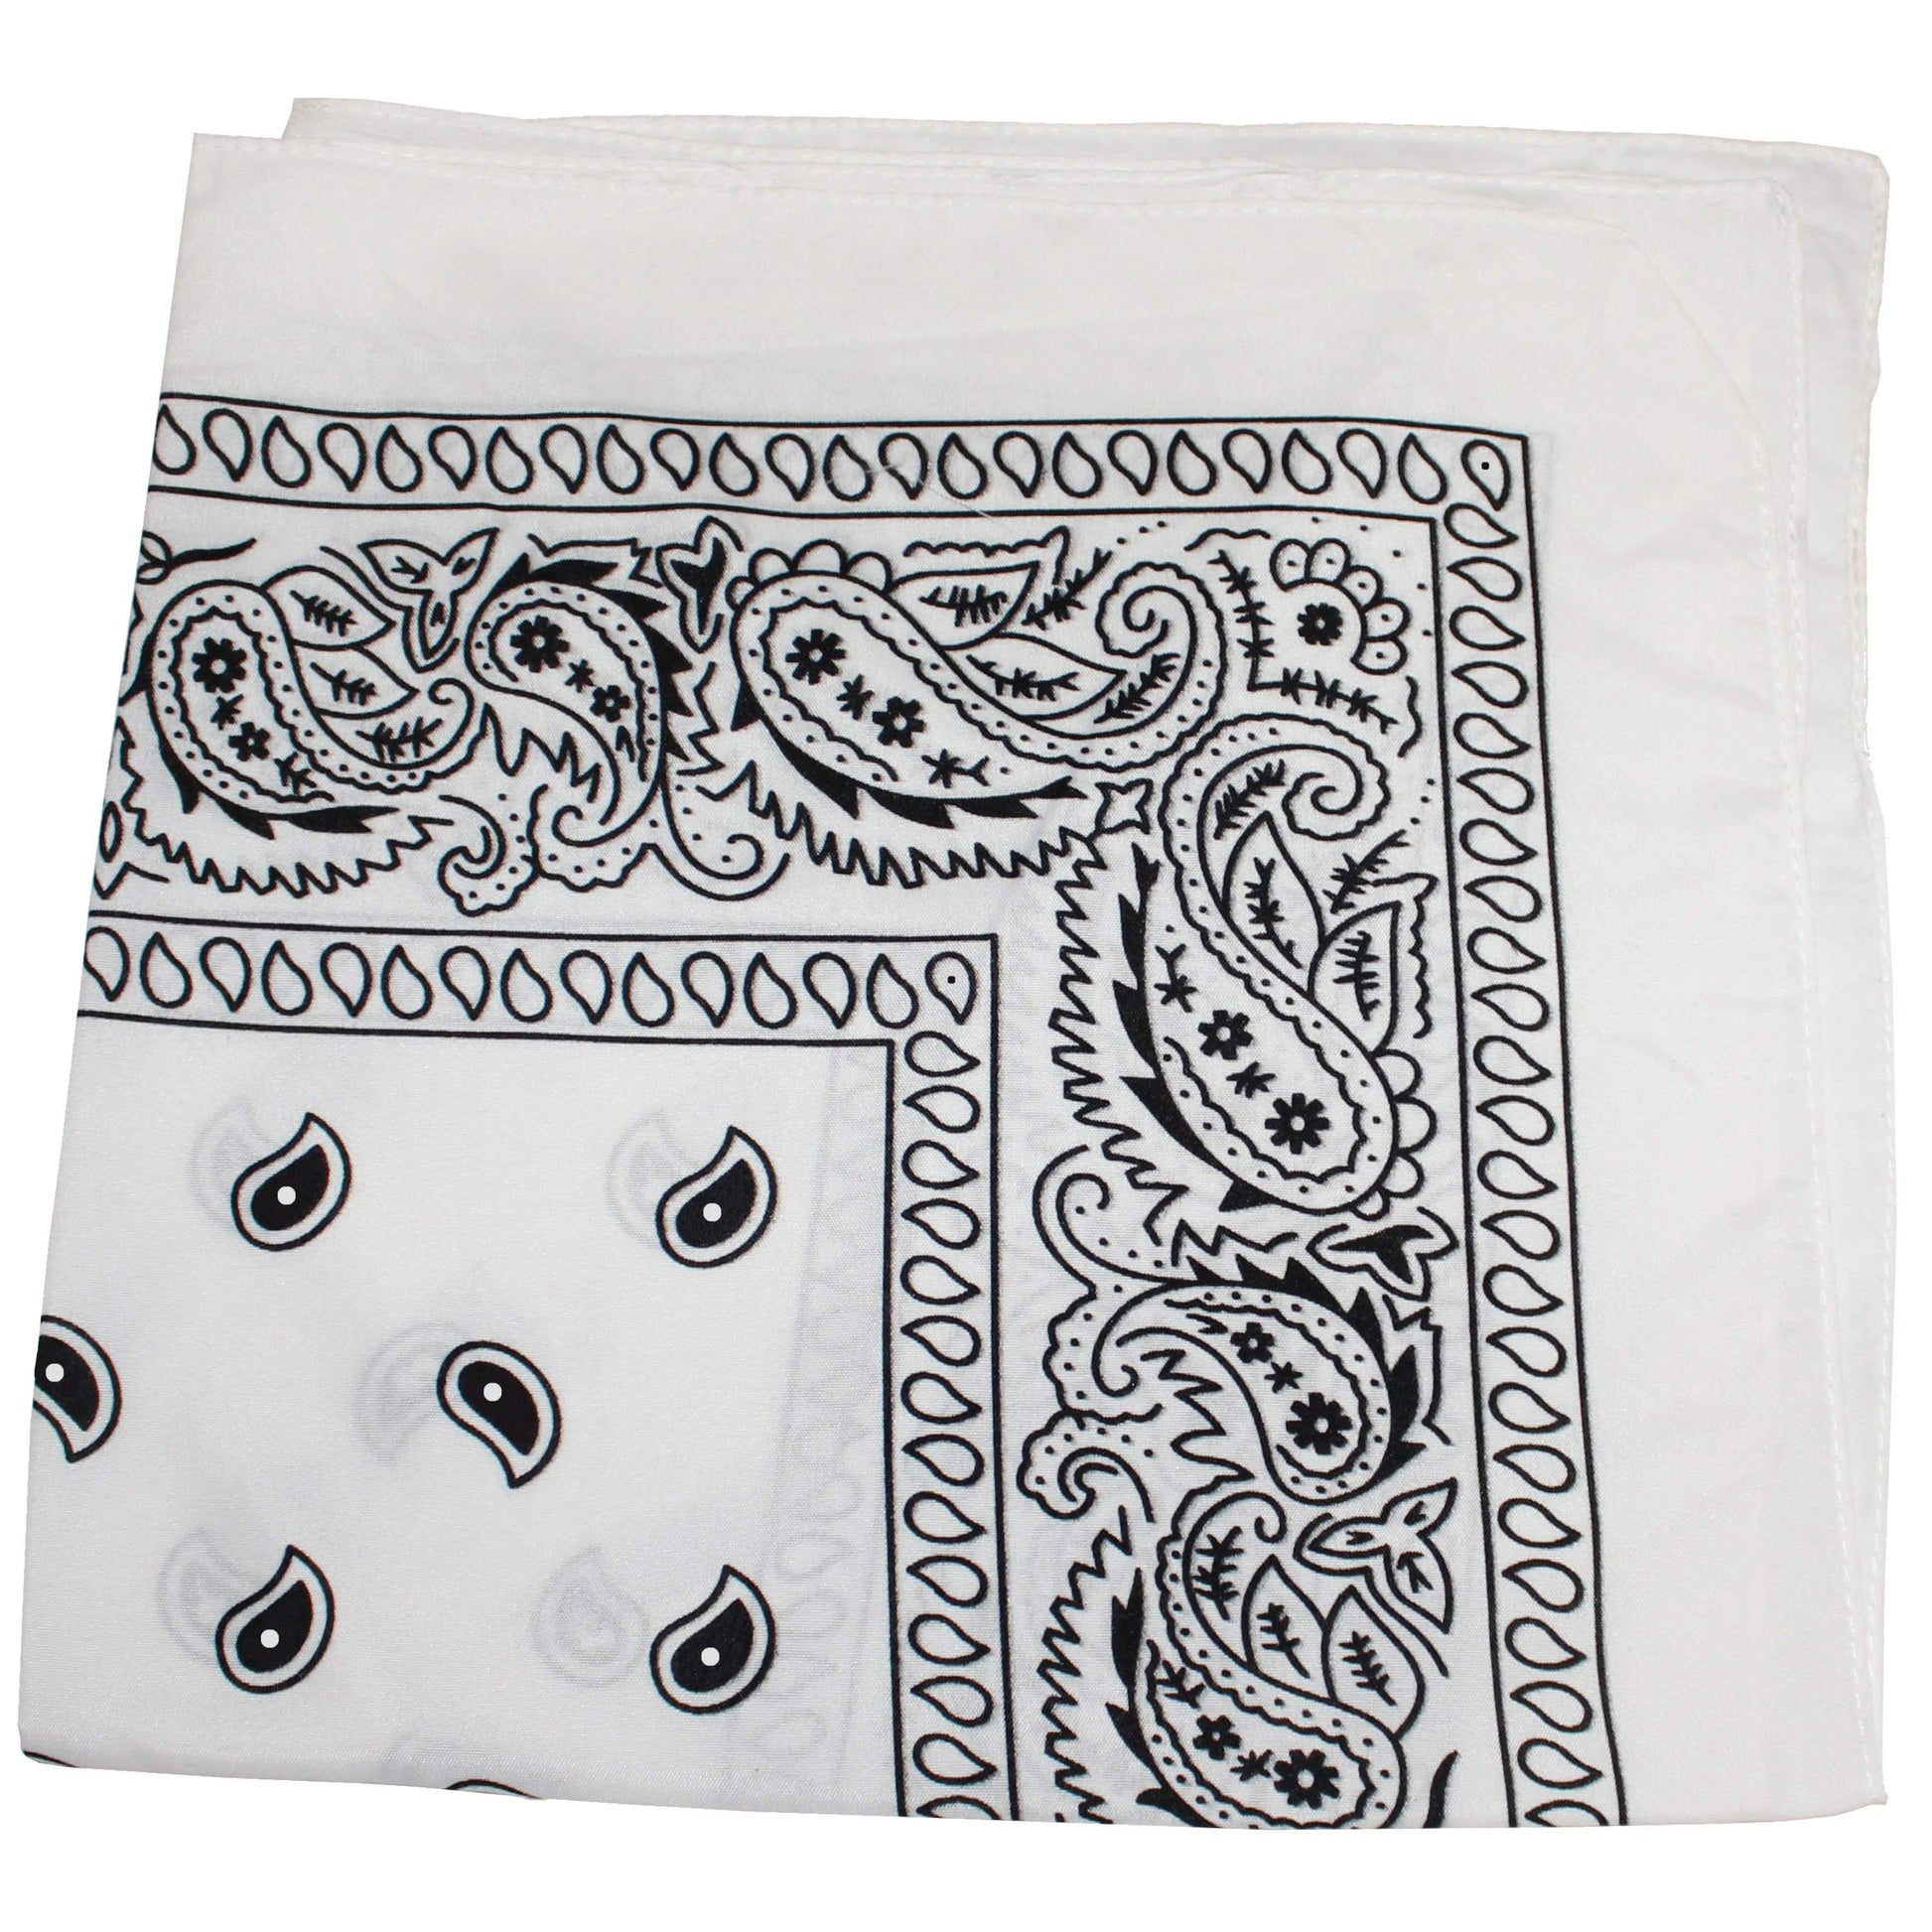 Pack of 6 Paisley Cotton Bandanas Novelty Headwraps - 22 inches